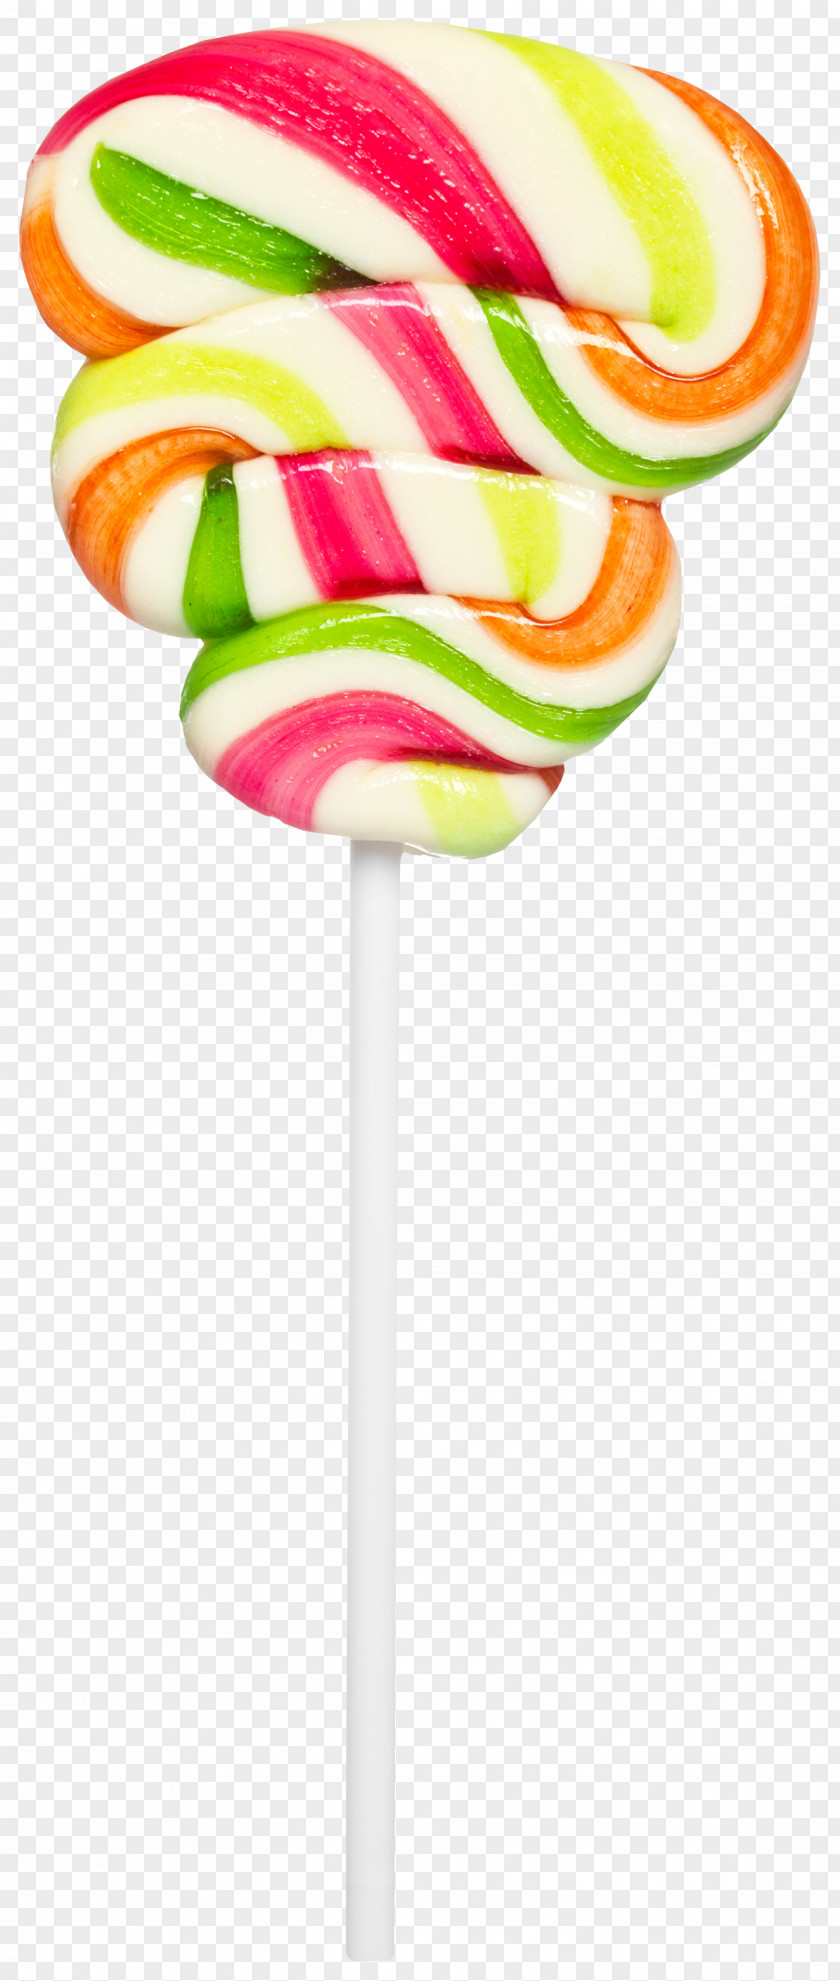 Lollipop Candy Photography Food Confectionery PNG